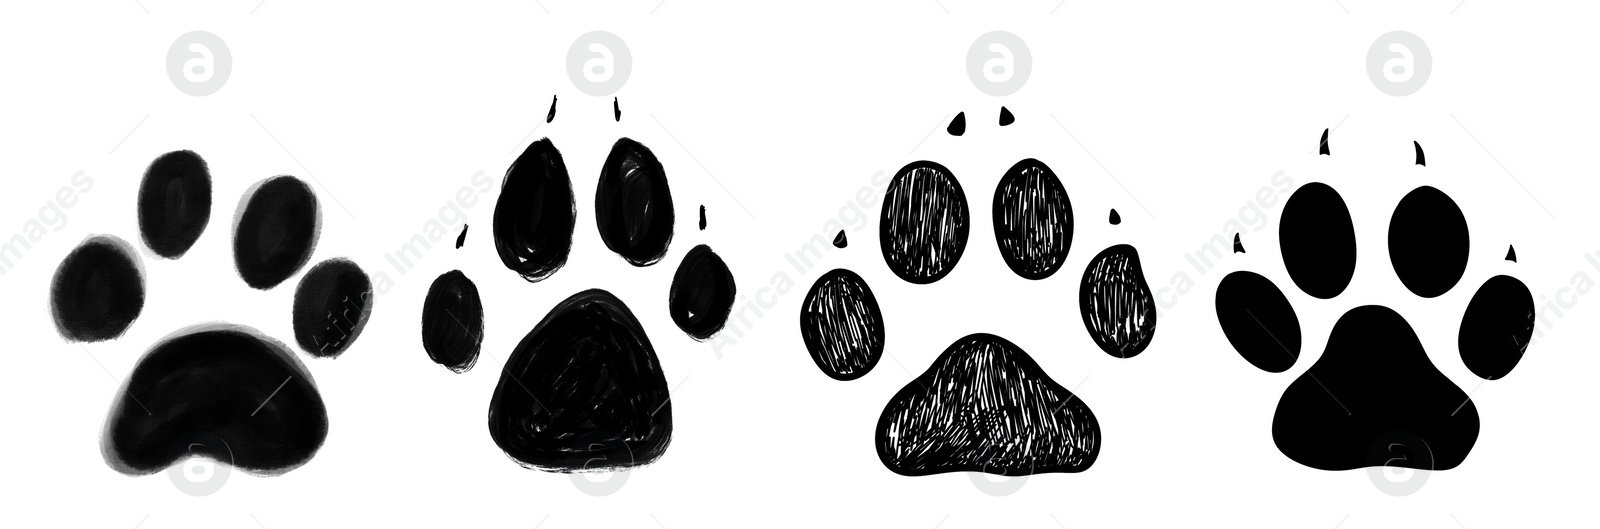 Image of Different dog paw prints on white background, illustration